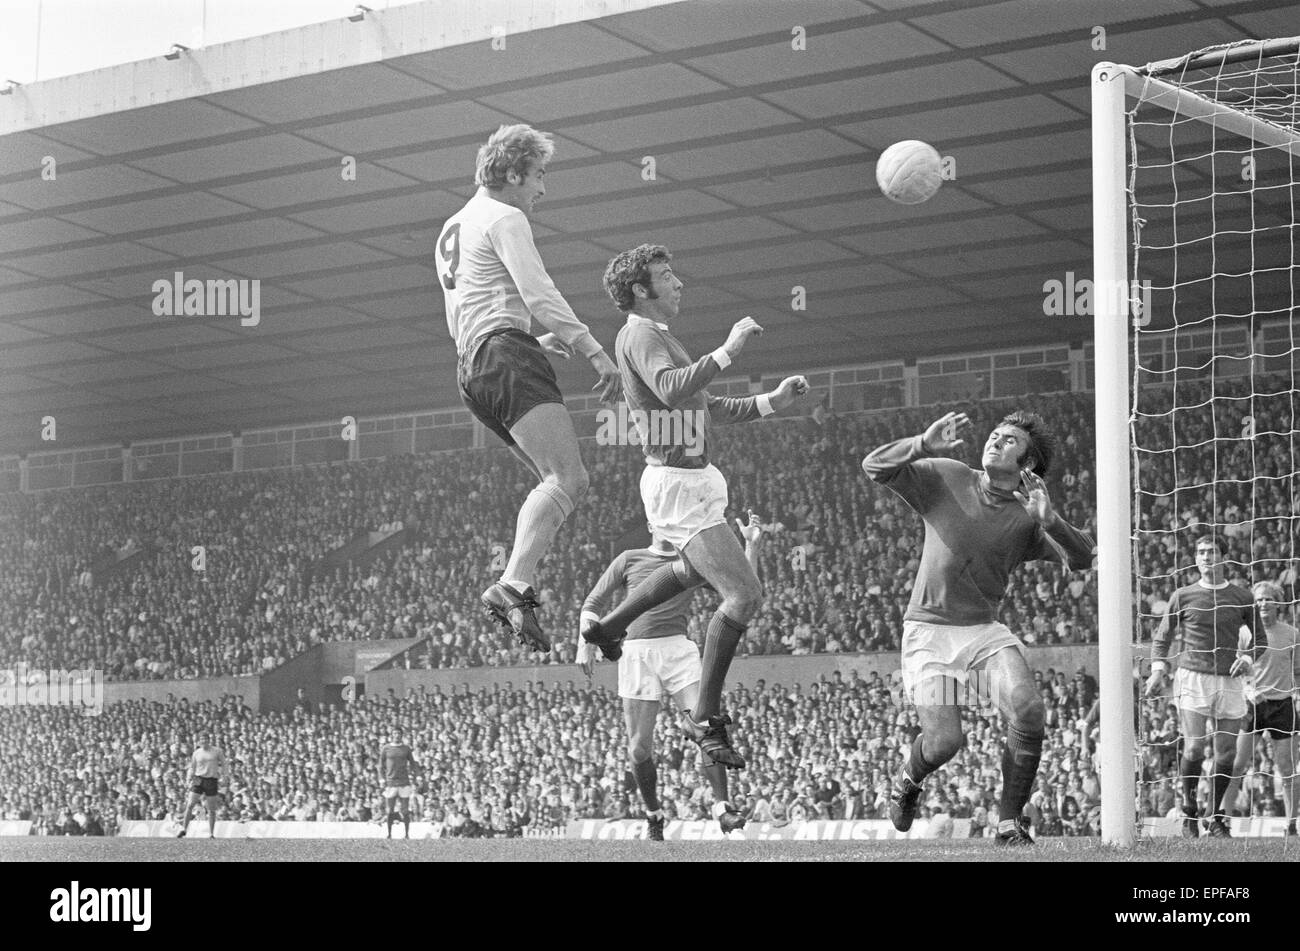 Manchester United 1-4 Southampton-League-Spiel im Old Trafford, Samstag, 16. August 1969. Stockfoto